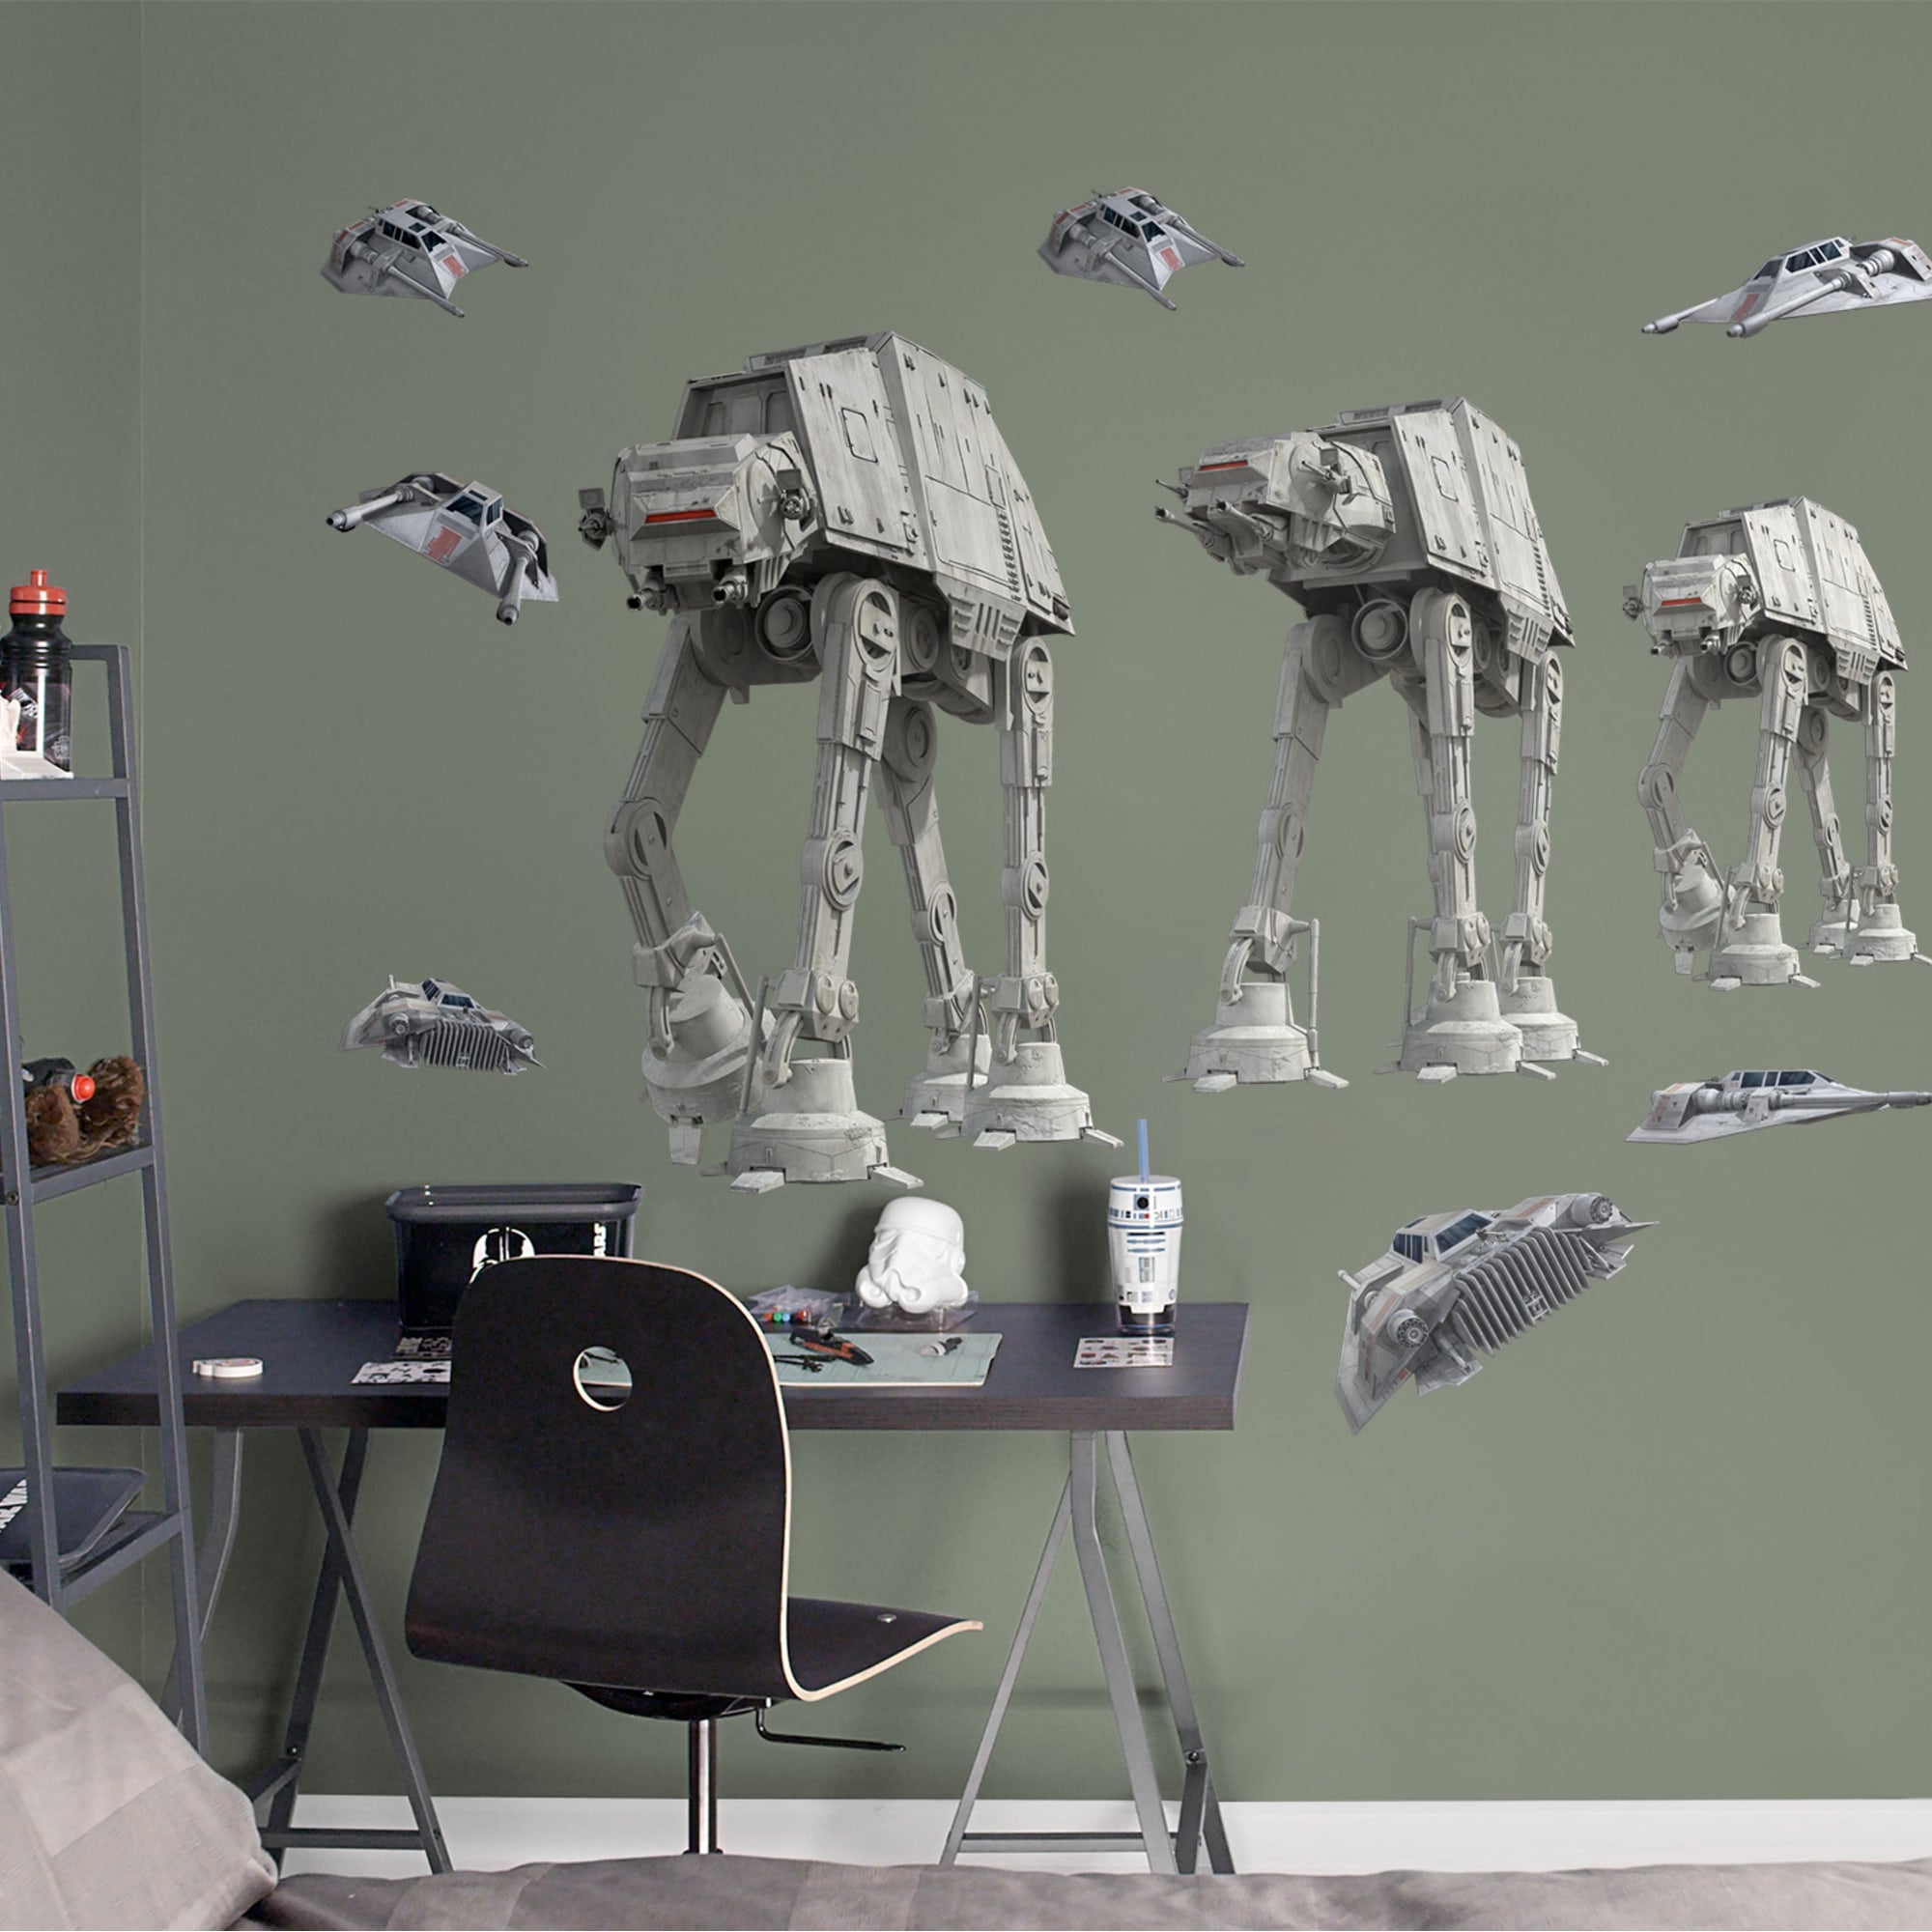 Star Wars: Battle of Hoth Collection - Officially Licensed Removable Wall Decals 79.0"W x 52.0"H by Fathead | Vinyl